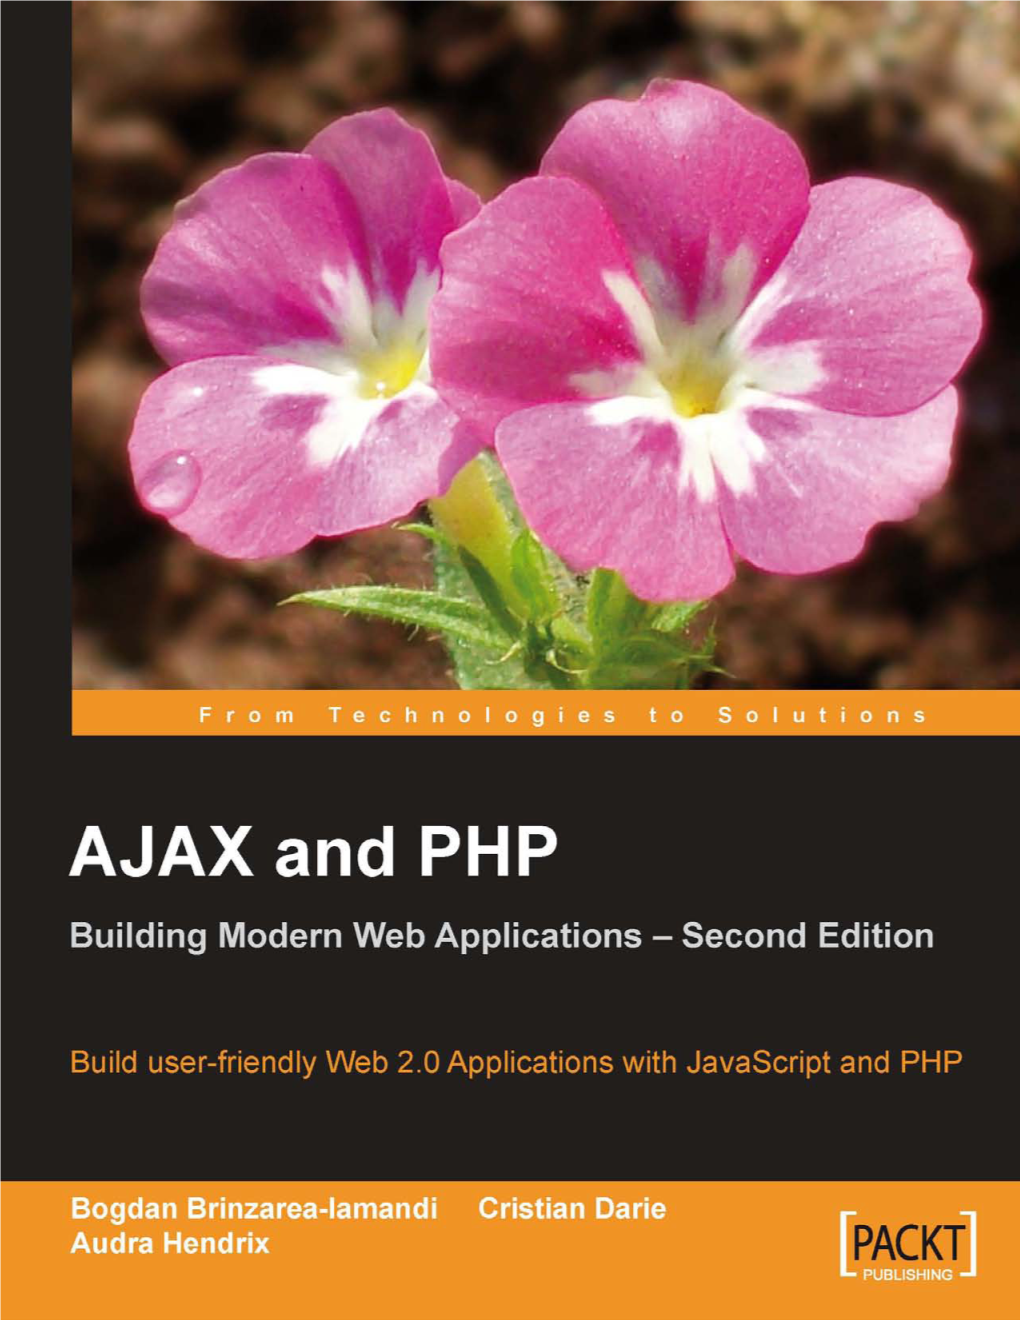 AJAX and PHP: Building Responsive Web Applications and Microsoft AJAX Library Essentials: Client-Side ASP.NET AJAX 1.0 Explained